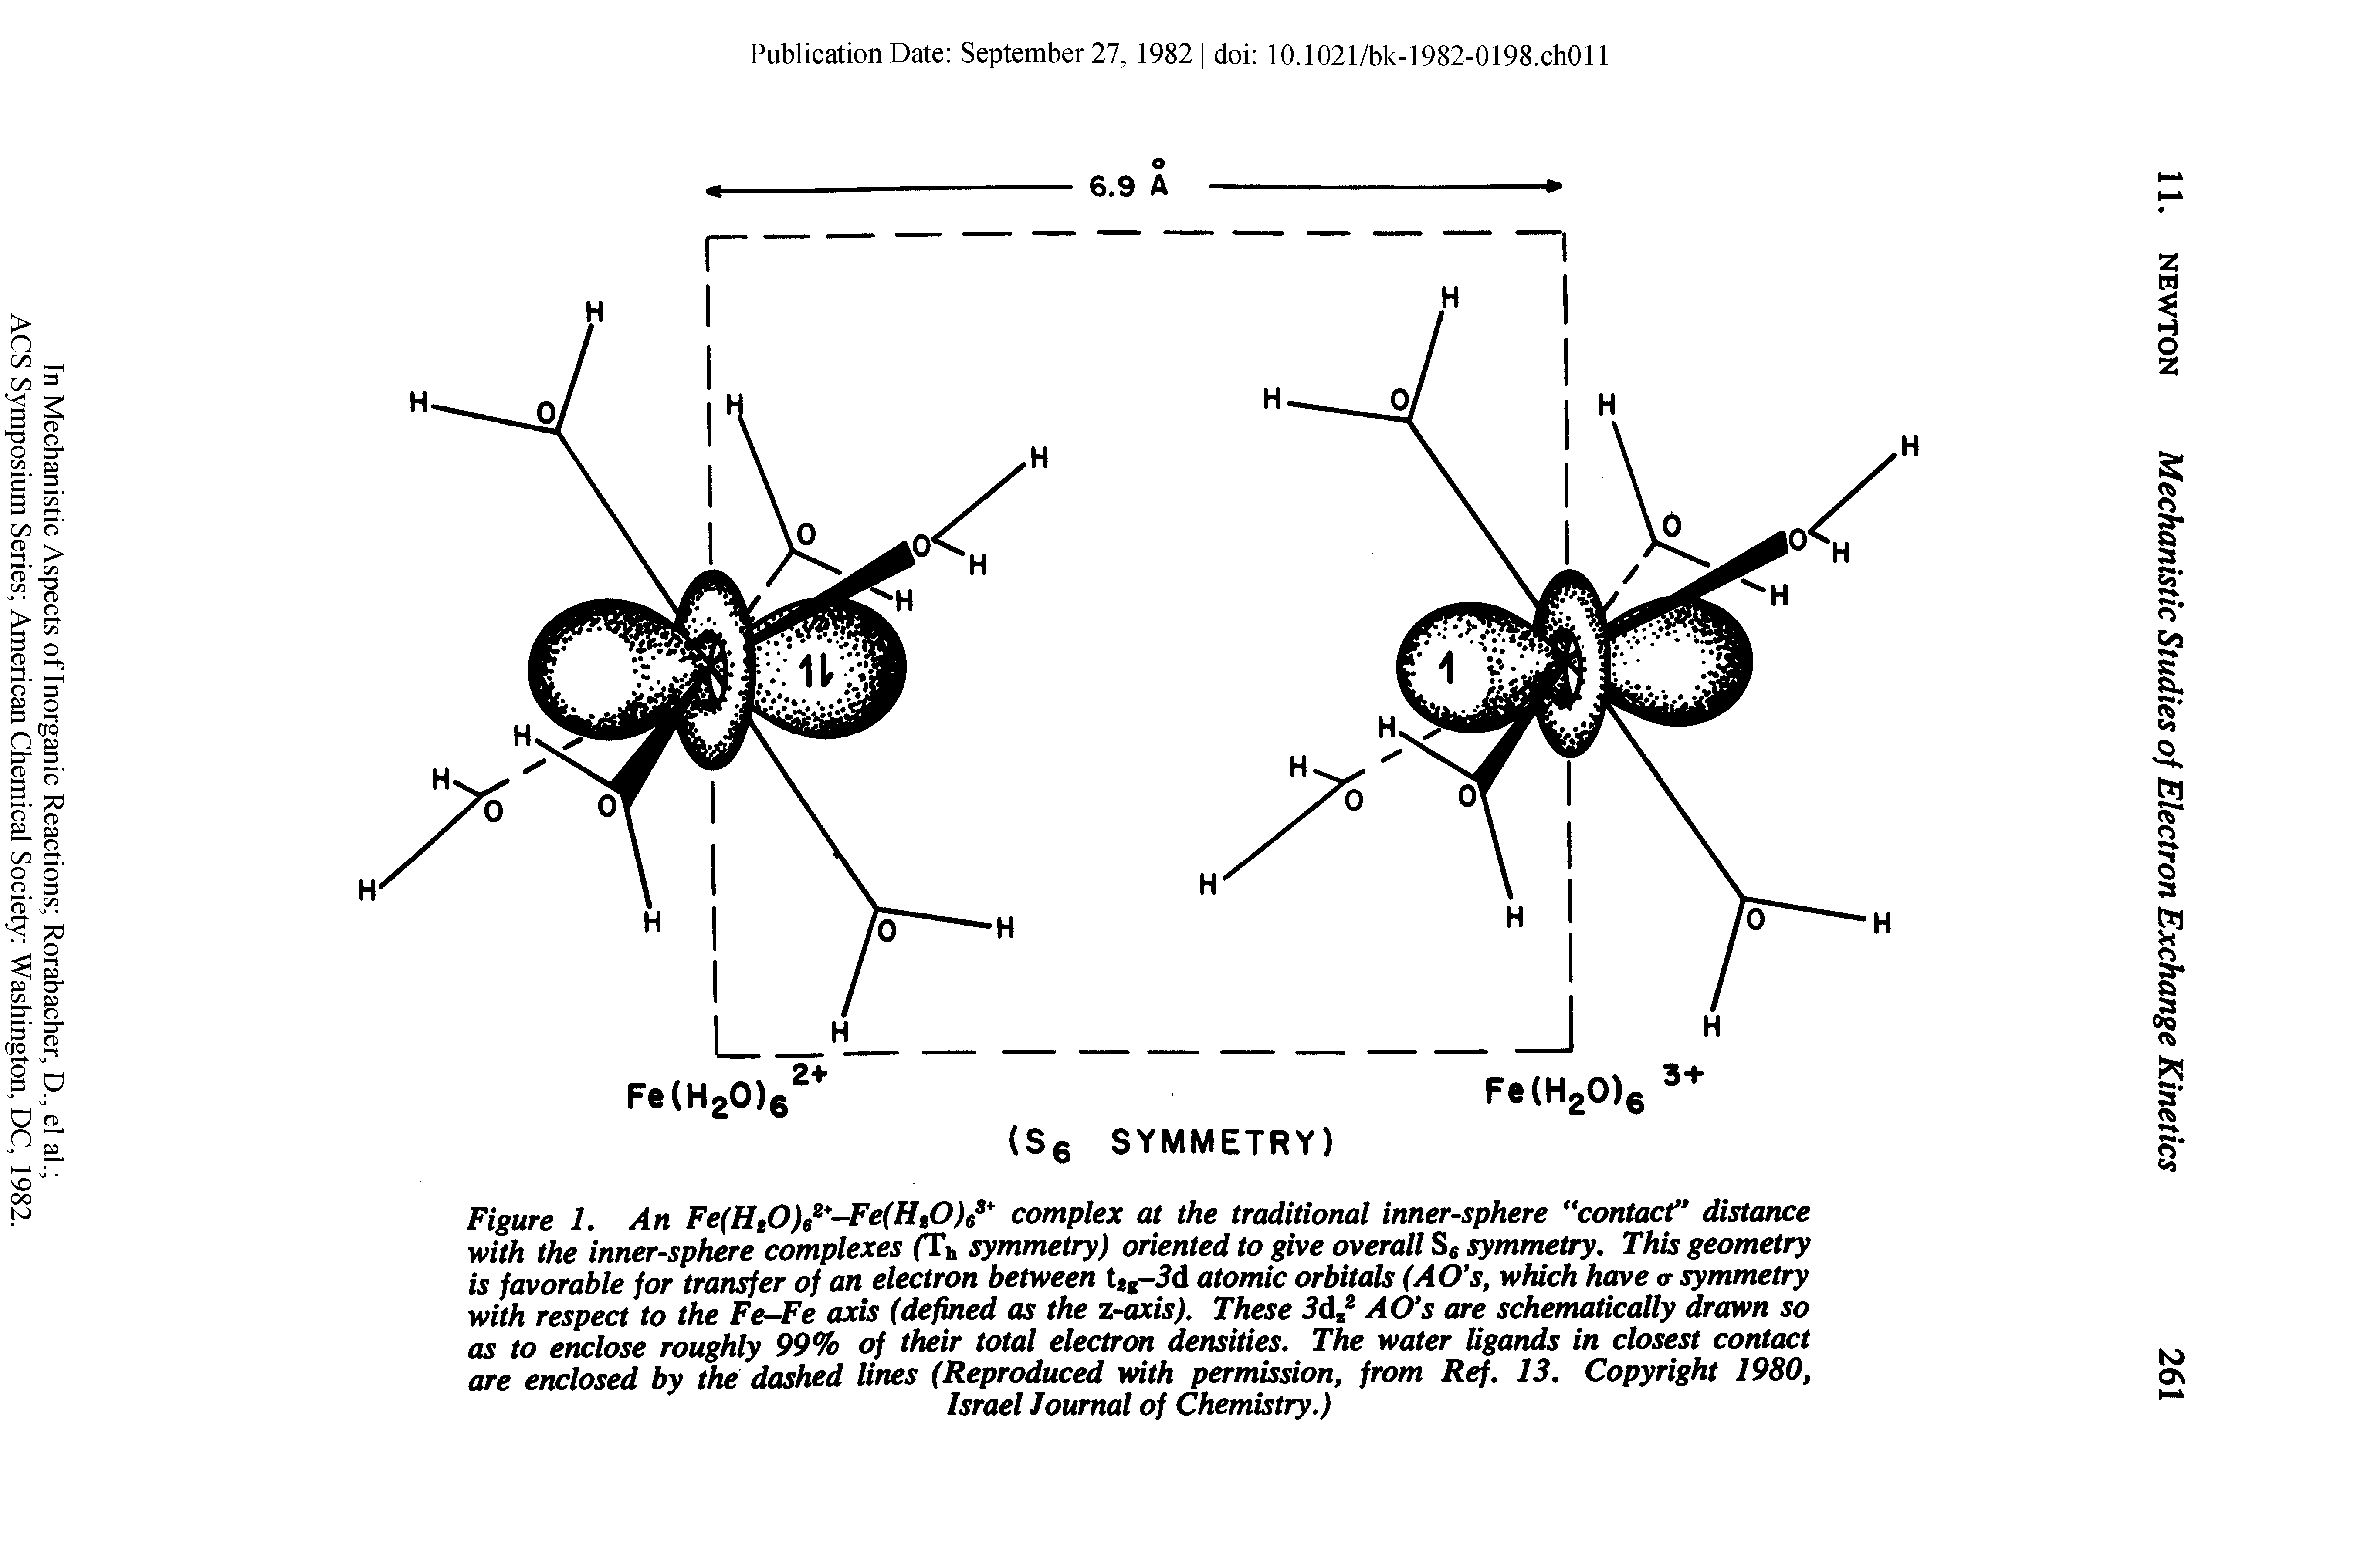 Figure 1. An Fe(H20)62+-Fe(HgO)6s+ complex at the traditional inner-sphere contact distance with the inner-sphere complexes (Th symmetry) oriented to give overall S6 symmetry. This geometry is favorable for transfer of an electron between t g-5d atomic orbitals (AO s, which have <r symmetry with respect to the Fe-Fe axis (defined as the z-axis). These 3ds2 AO s are schematically drawn so as to enclose roughly 99% of their total electron densities. The water ligands in closest contact are enclosed by the dashed lines (Reproduced with permission, from Ref. 13. Copyright 1980,...